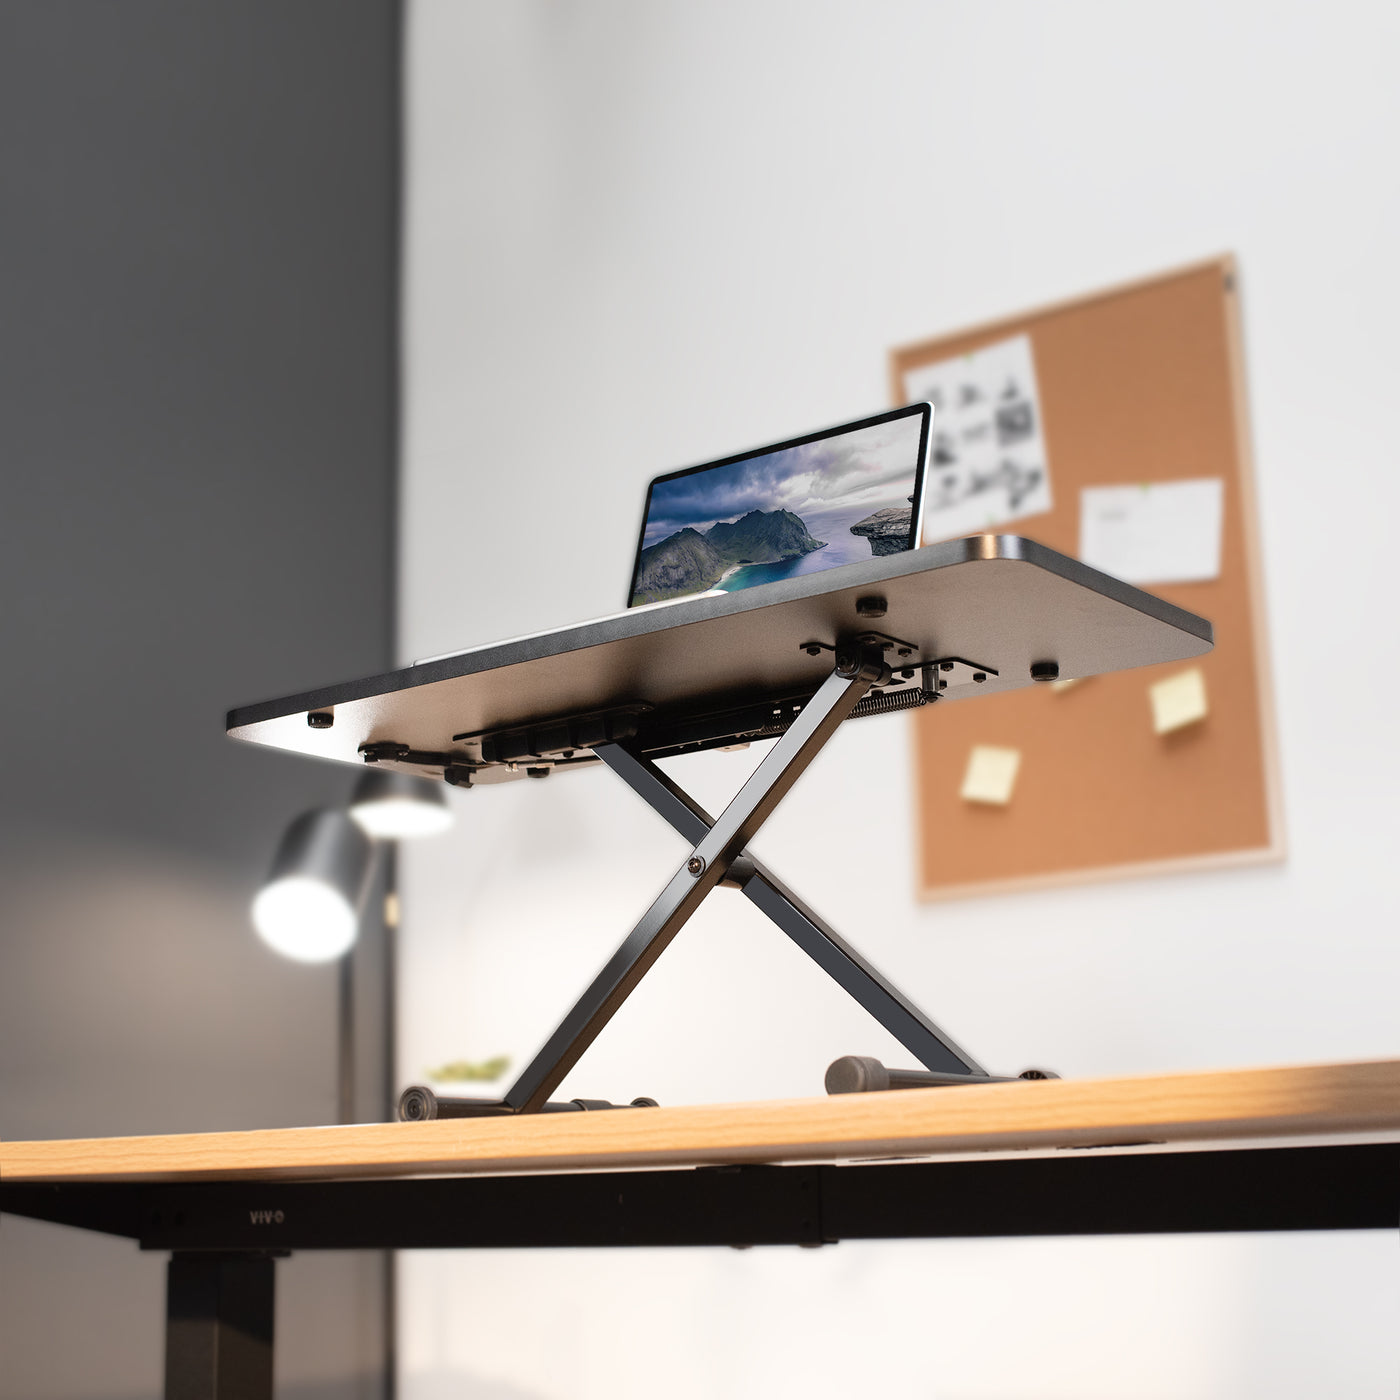 The sturdy X-frame design will securely support your office equipment.